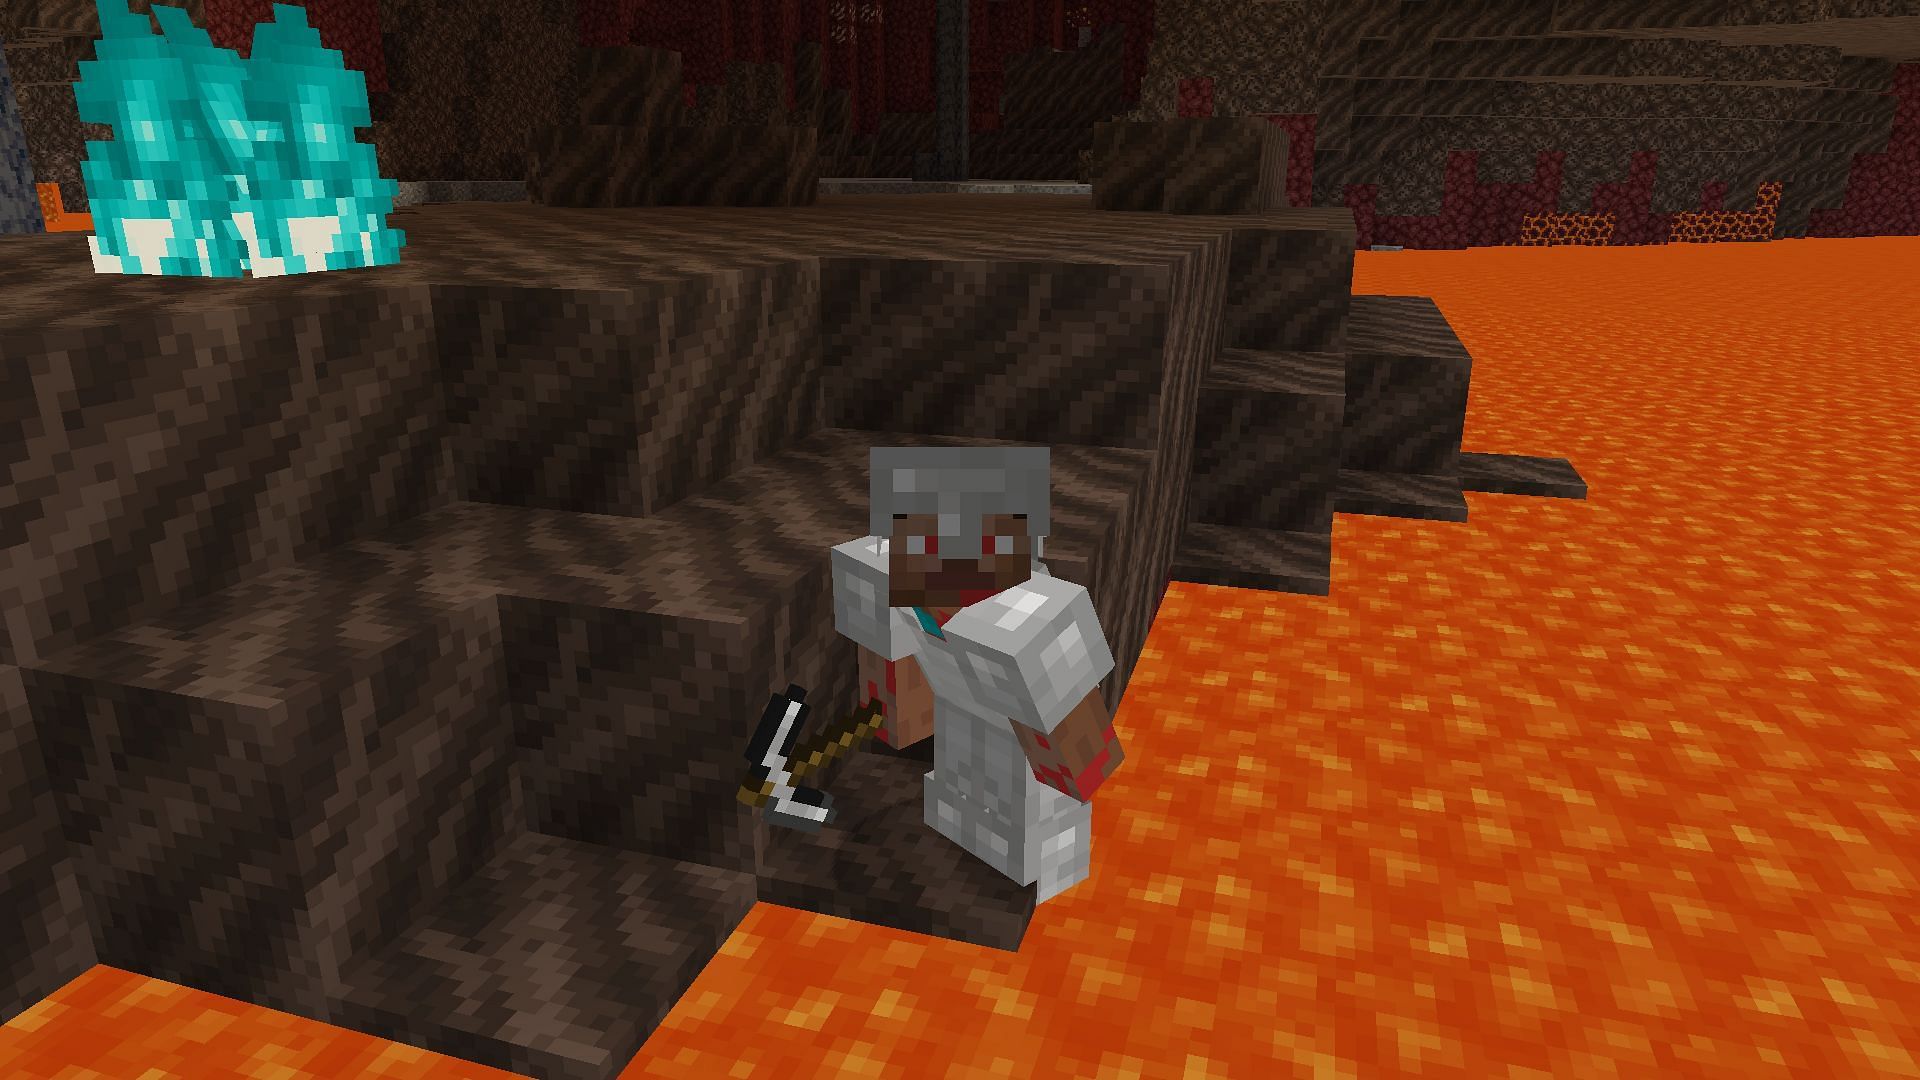 Crouch during travelling in Nether (Image via Minecraft)